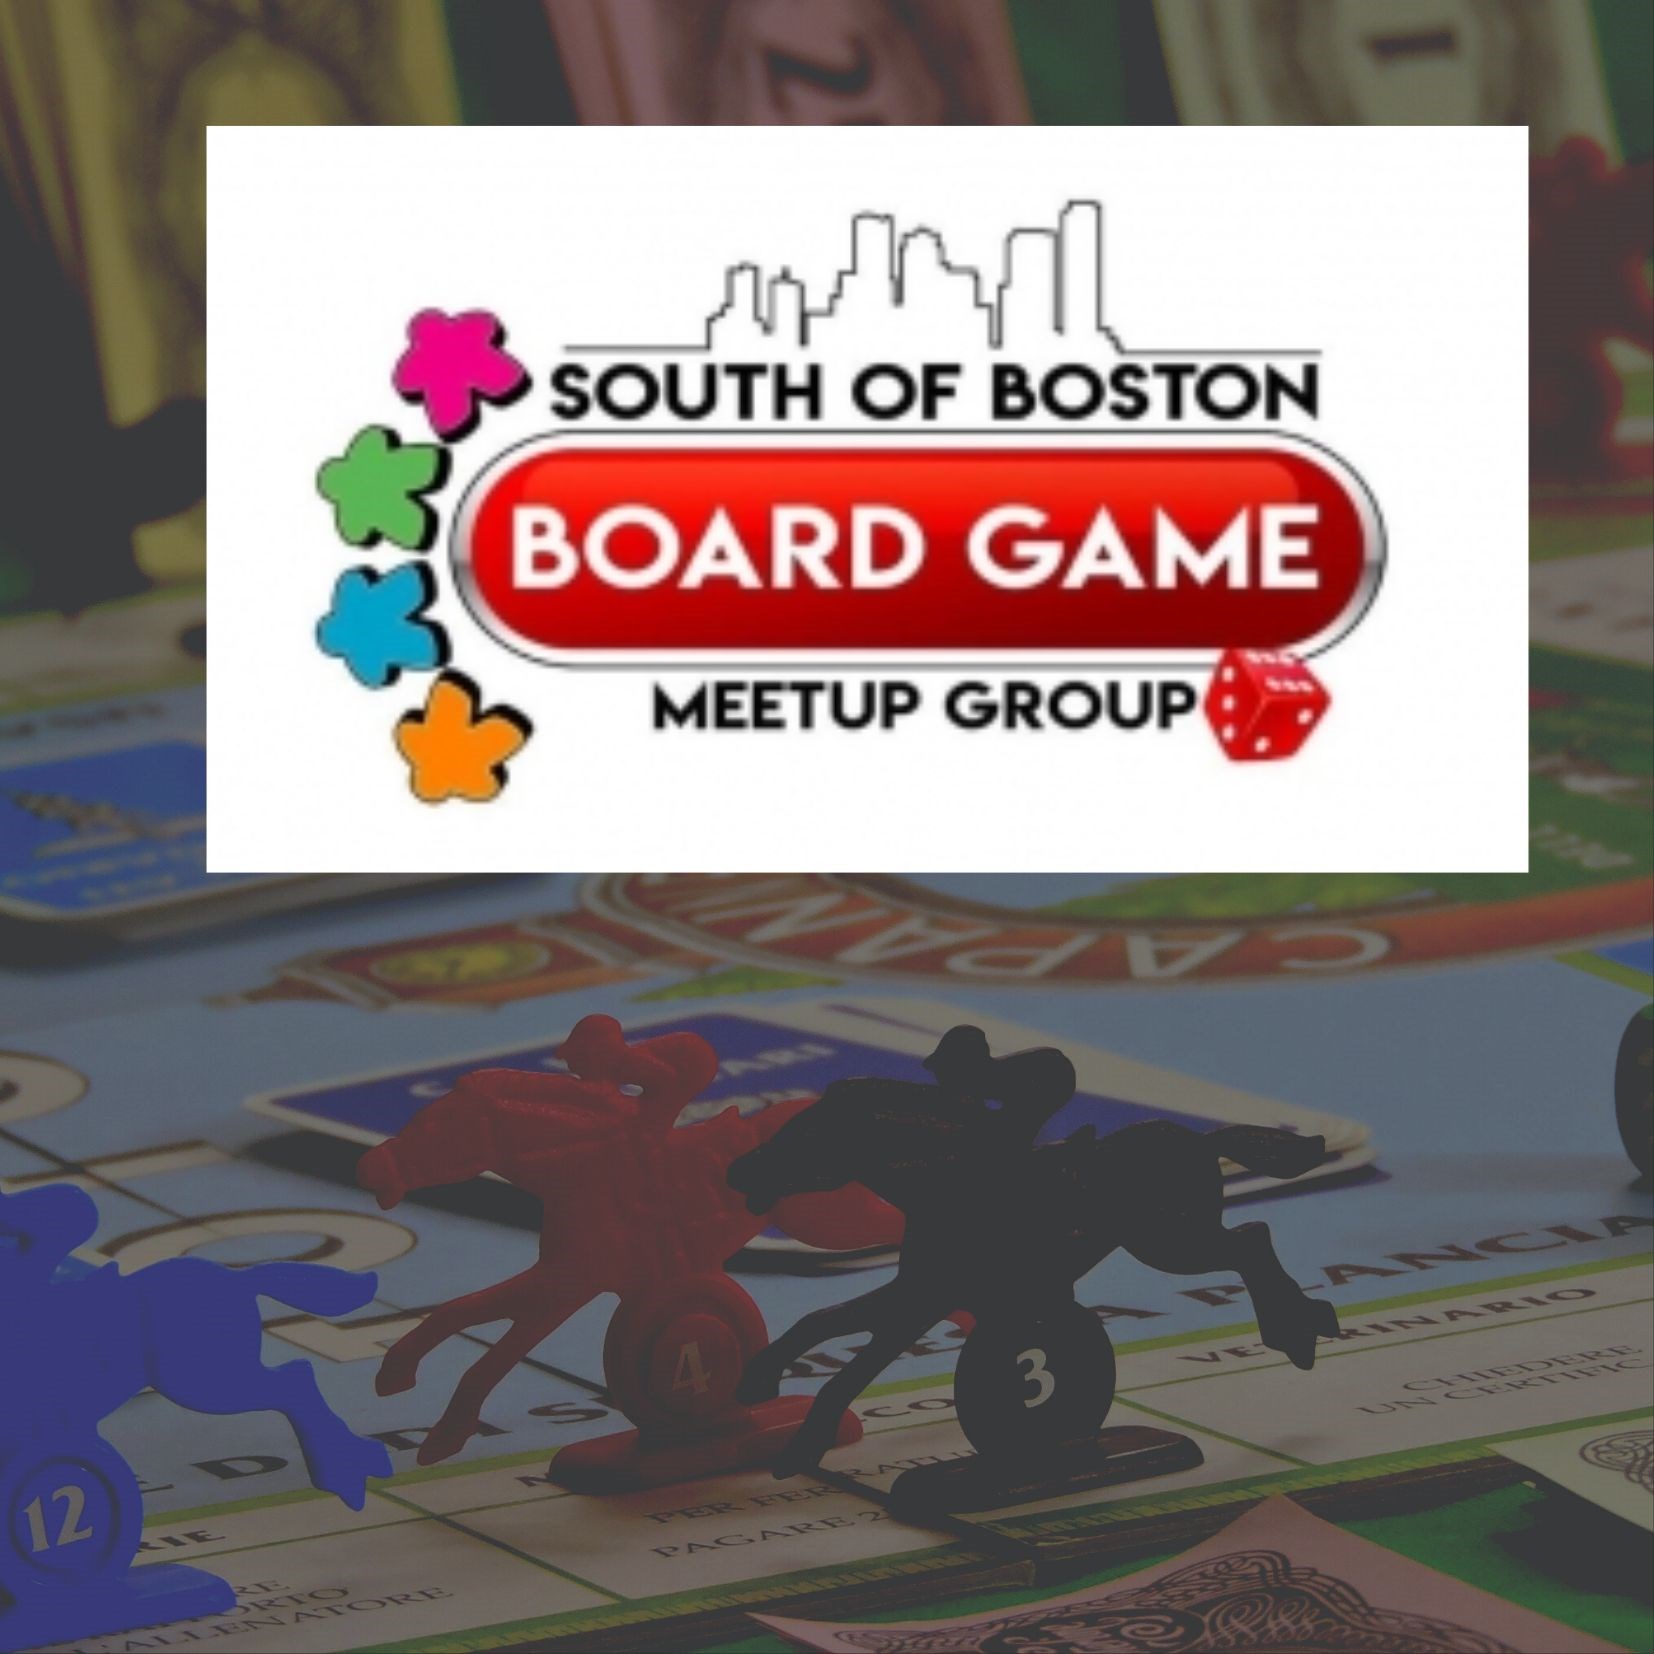 South of Boston Board Game